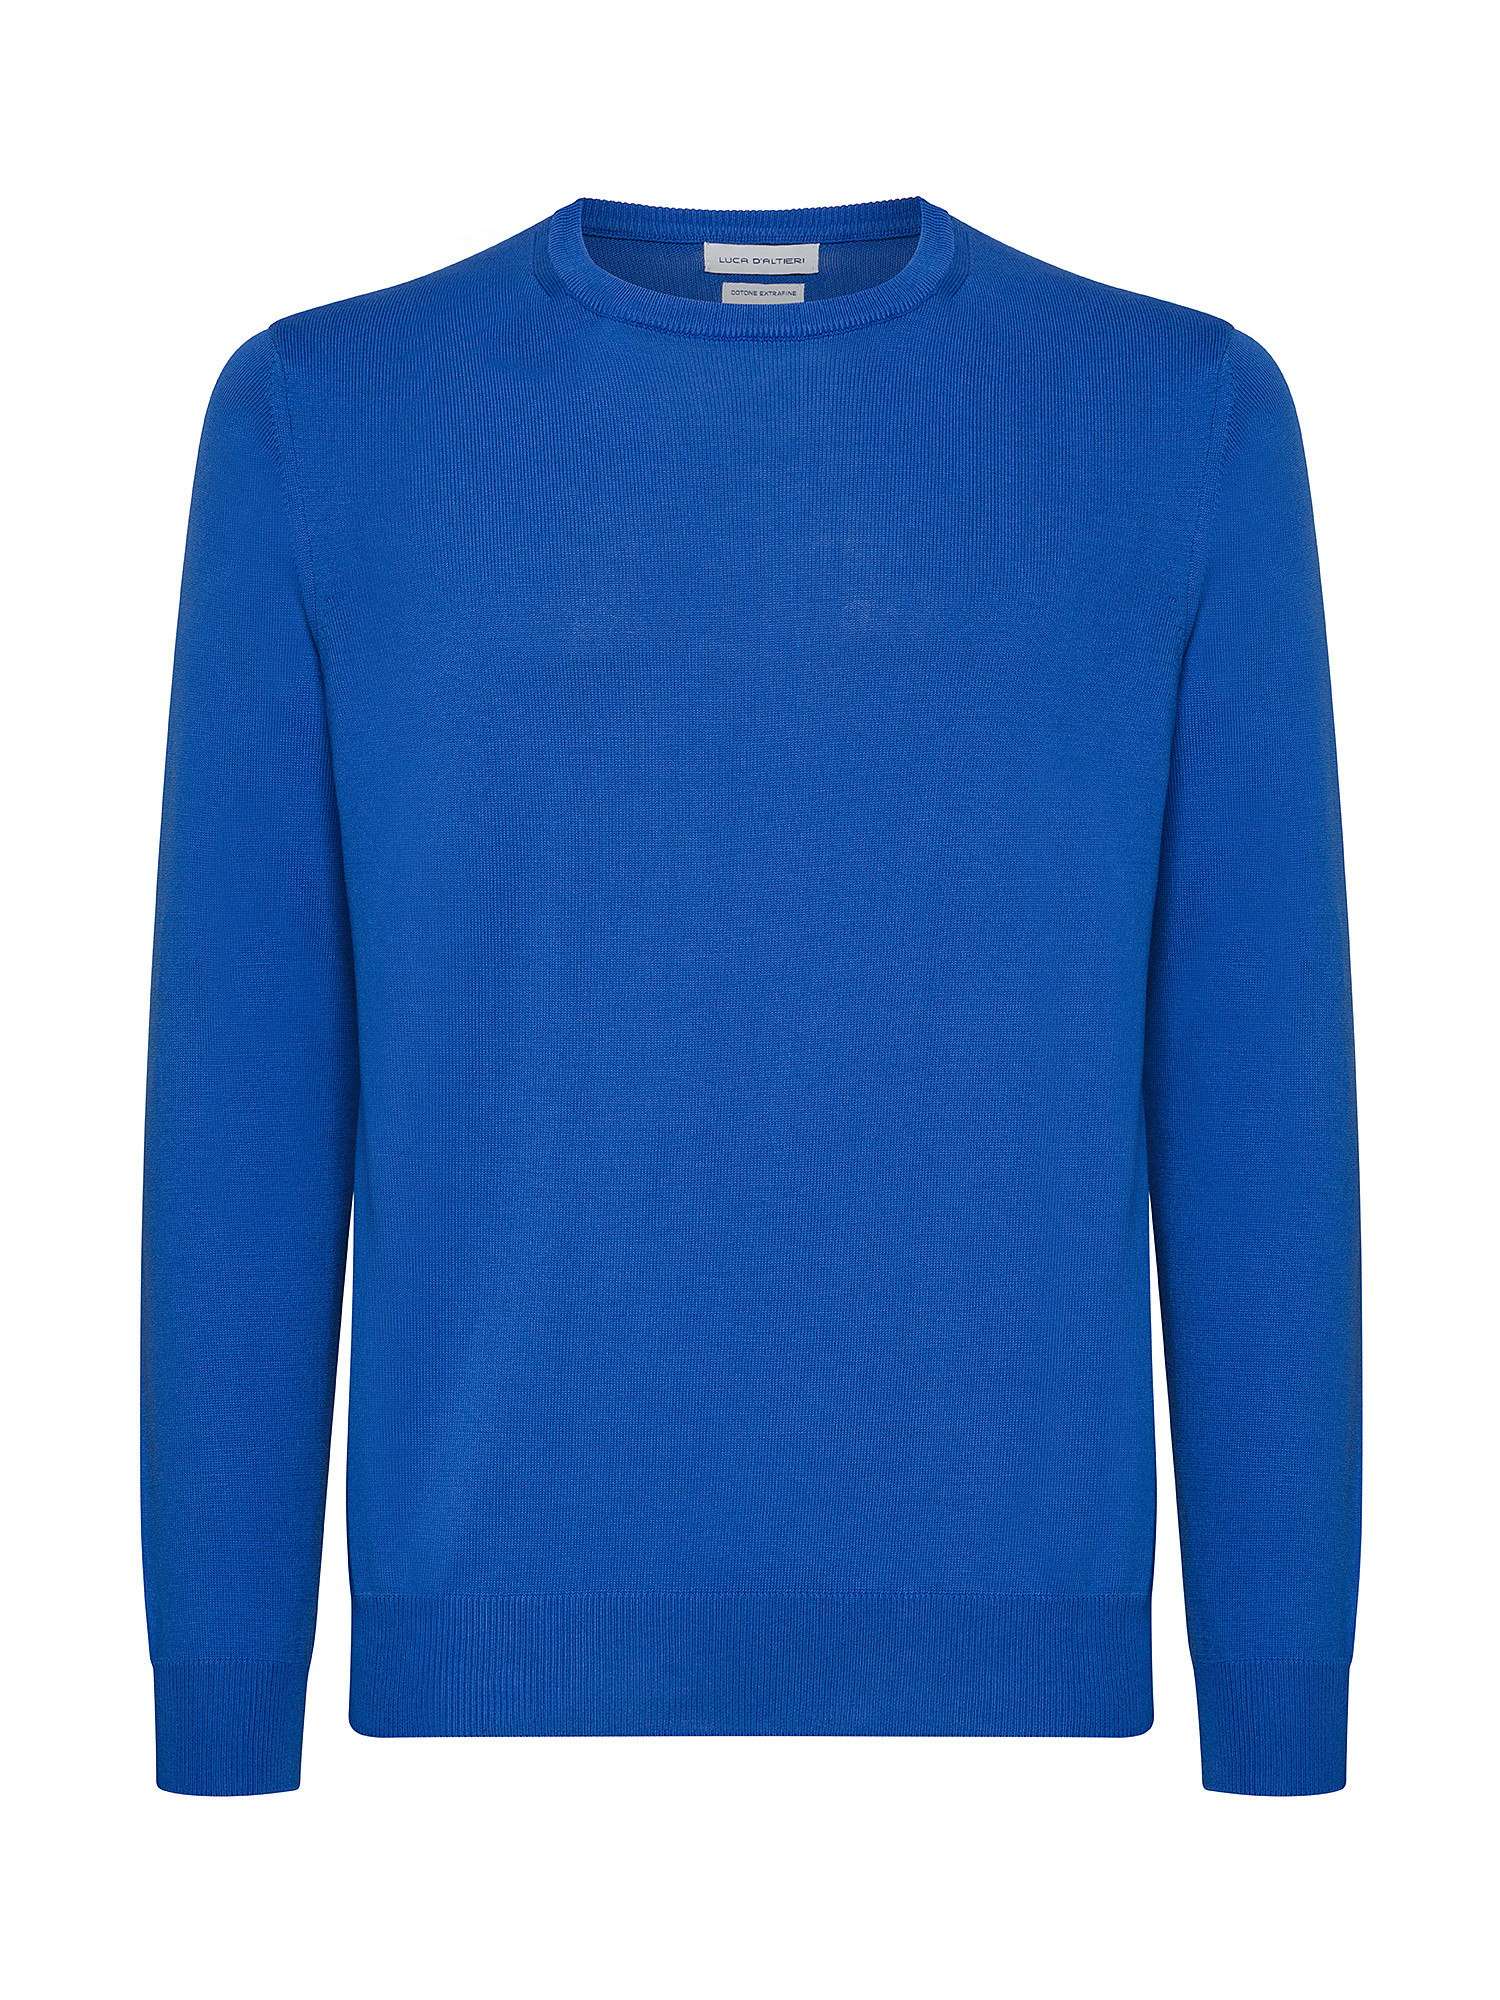 Luca D'Altieri - Crew neck sweater in extrafine pure cotton, Royal Blue, large image number 0